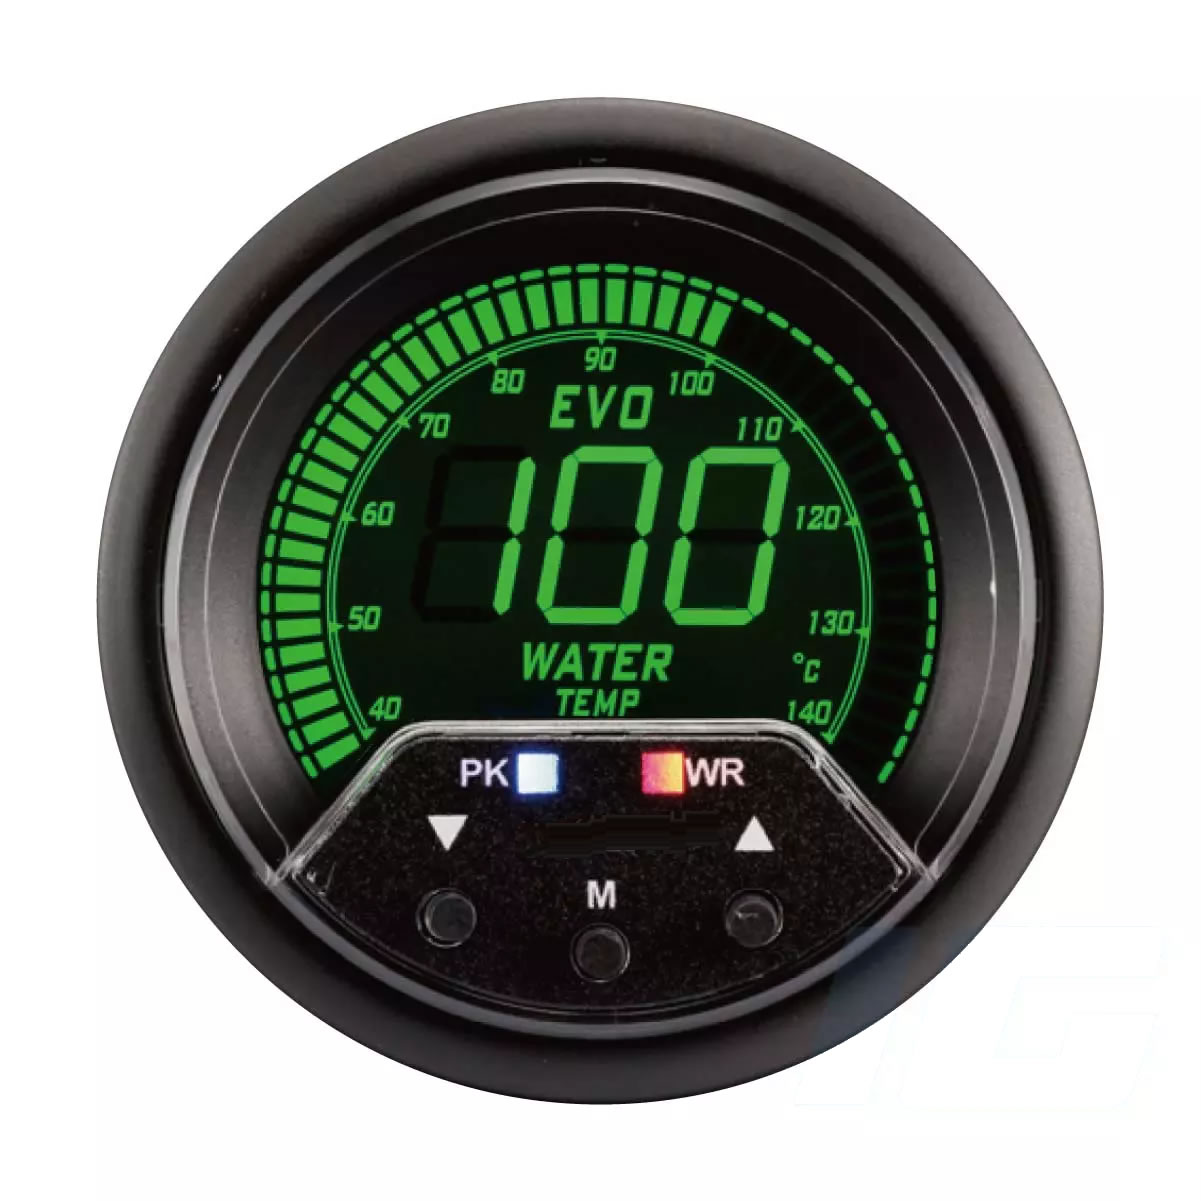 60mm LCD Performance Car Gauges - Water Temp Gauge With Sensor and Warning and Peak For Your Sport Racing Car